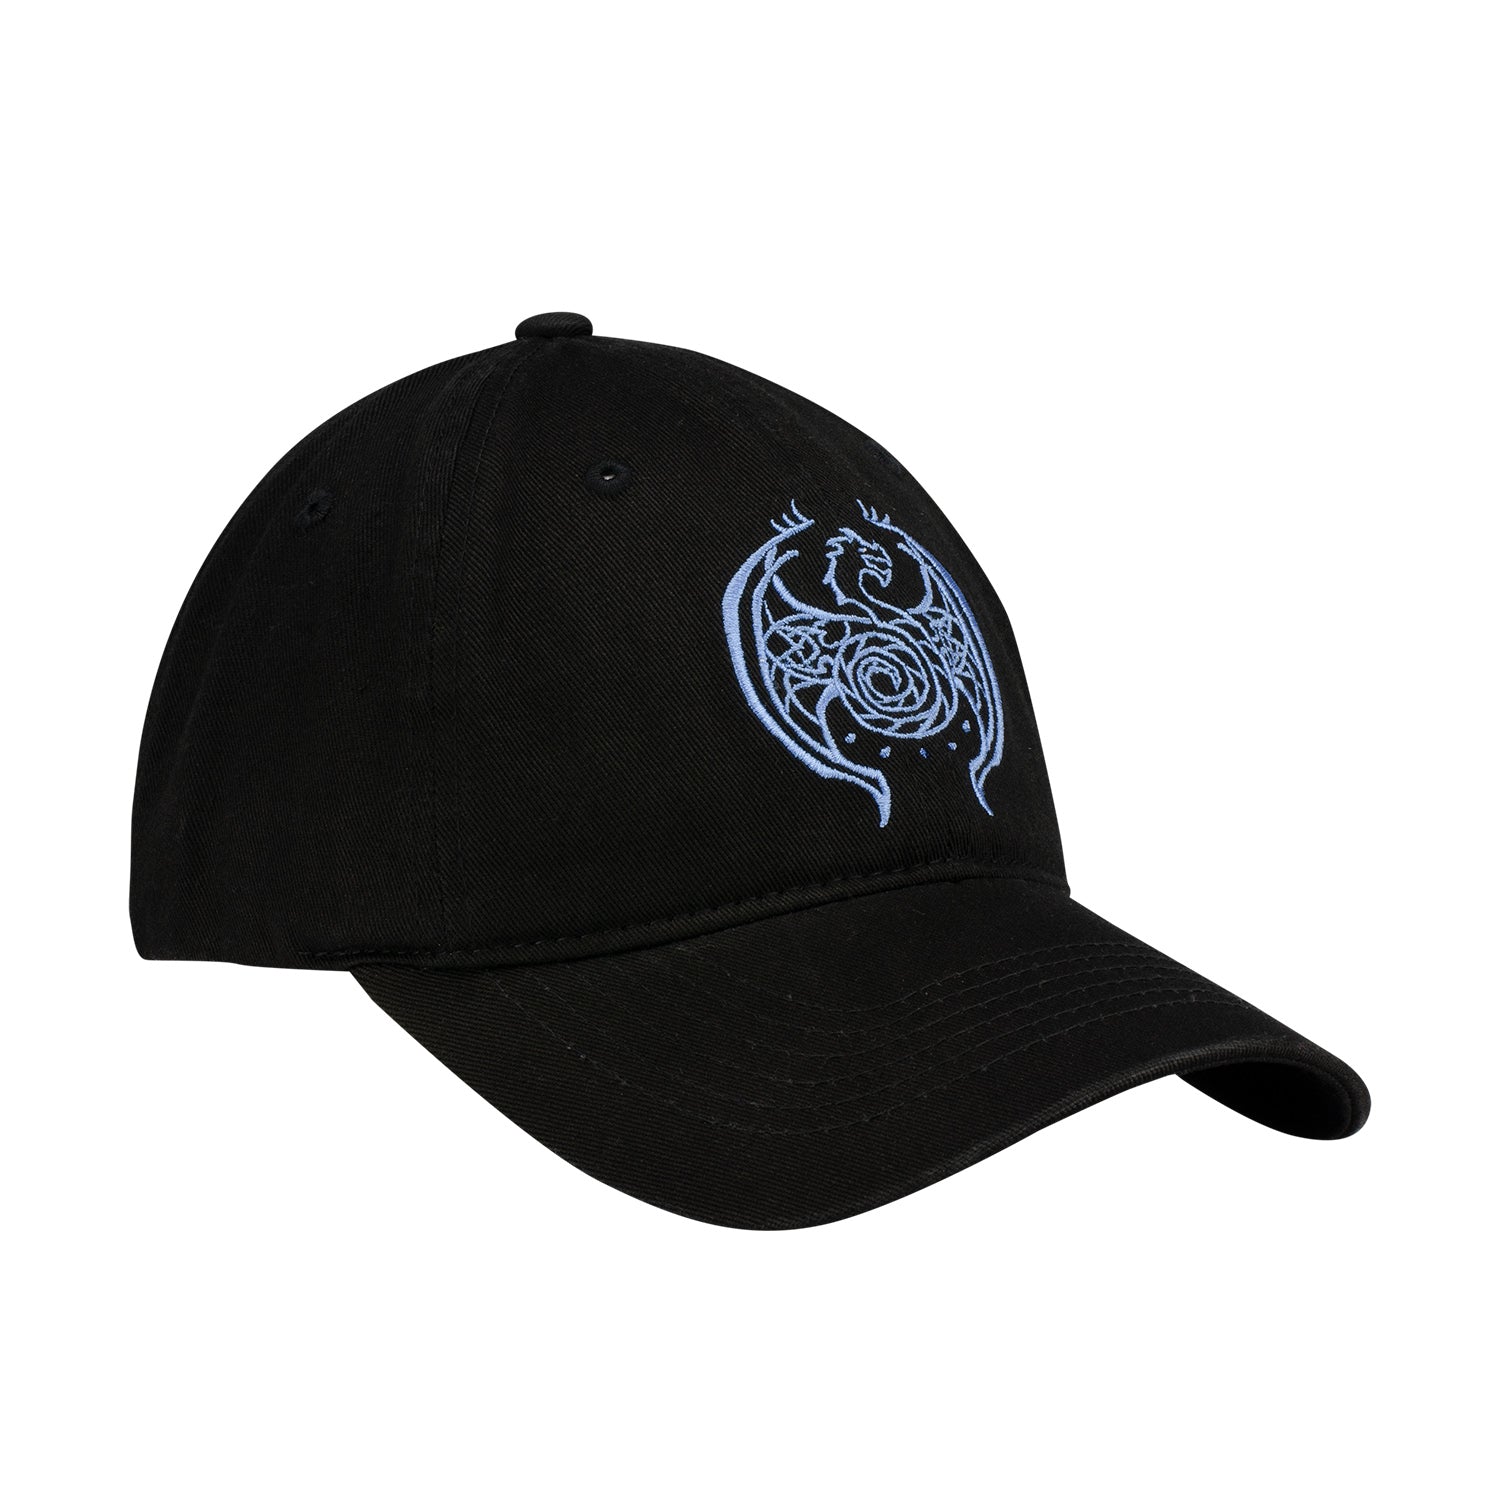 World Of Warcraft Dragonflight Black Dad Hat - Right Side View with Dragonflight Logo